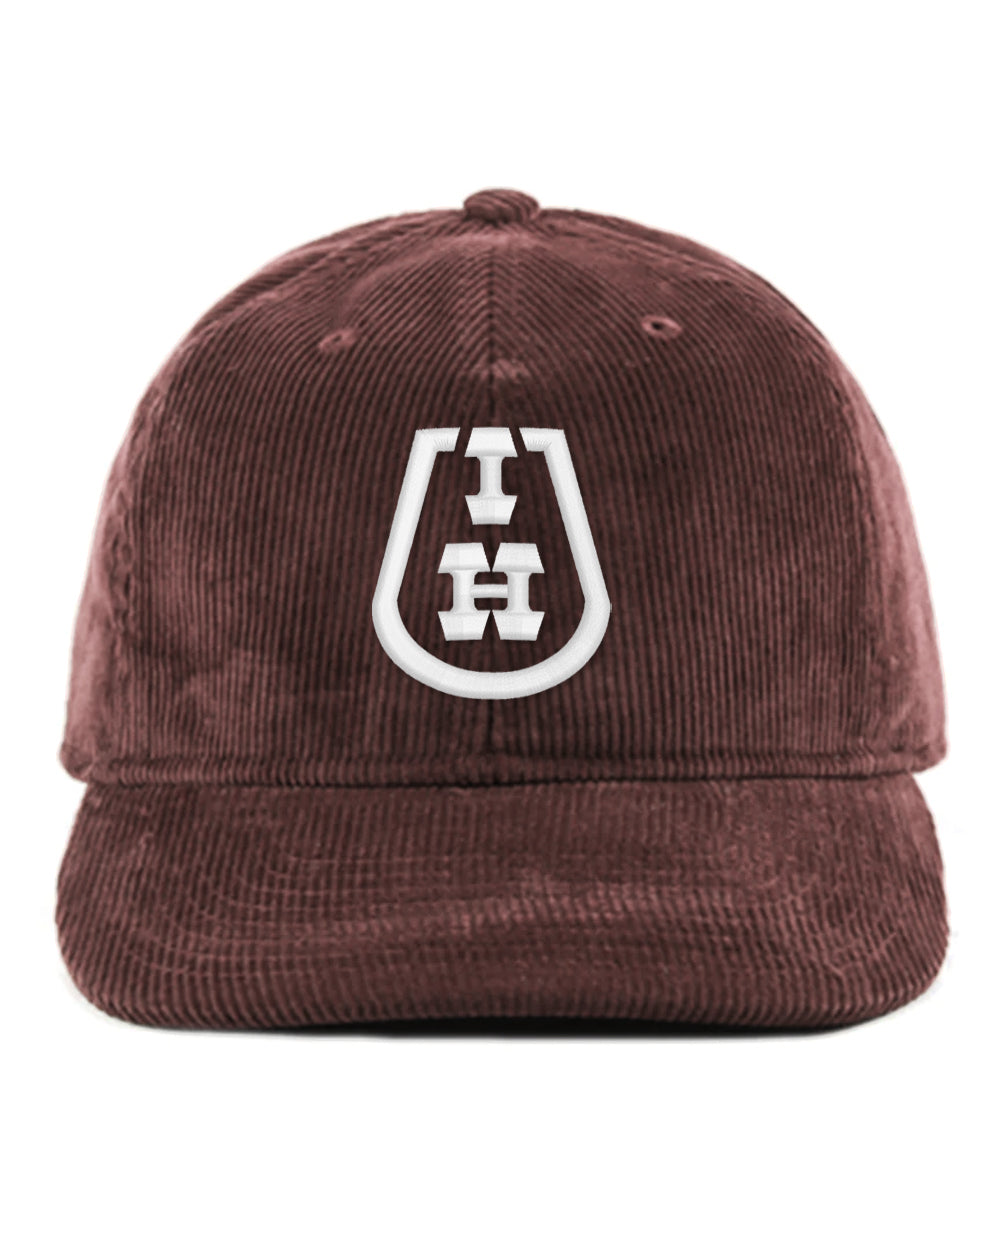 The Iron Horse Logo embroidered corduroy hat - Brown